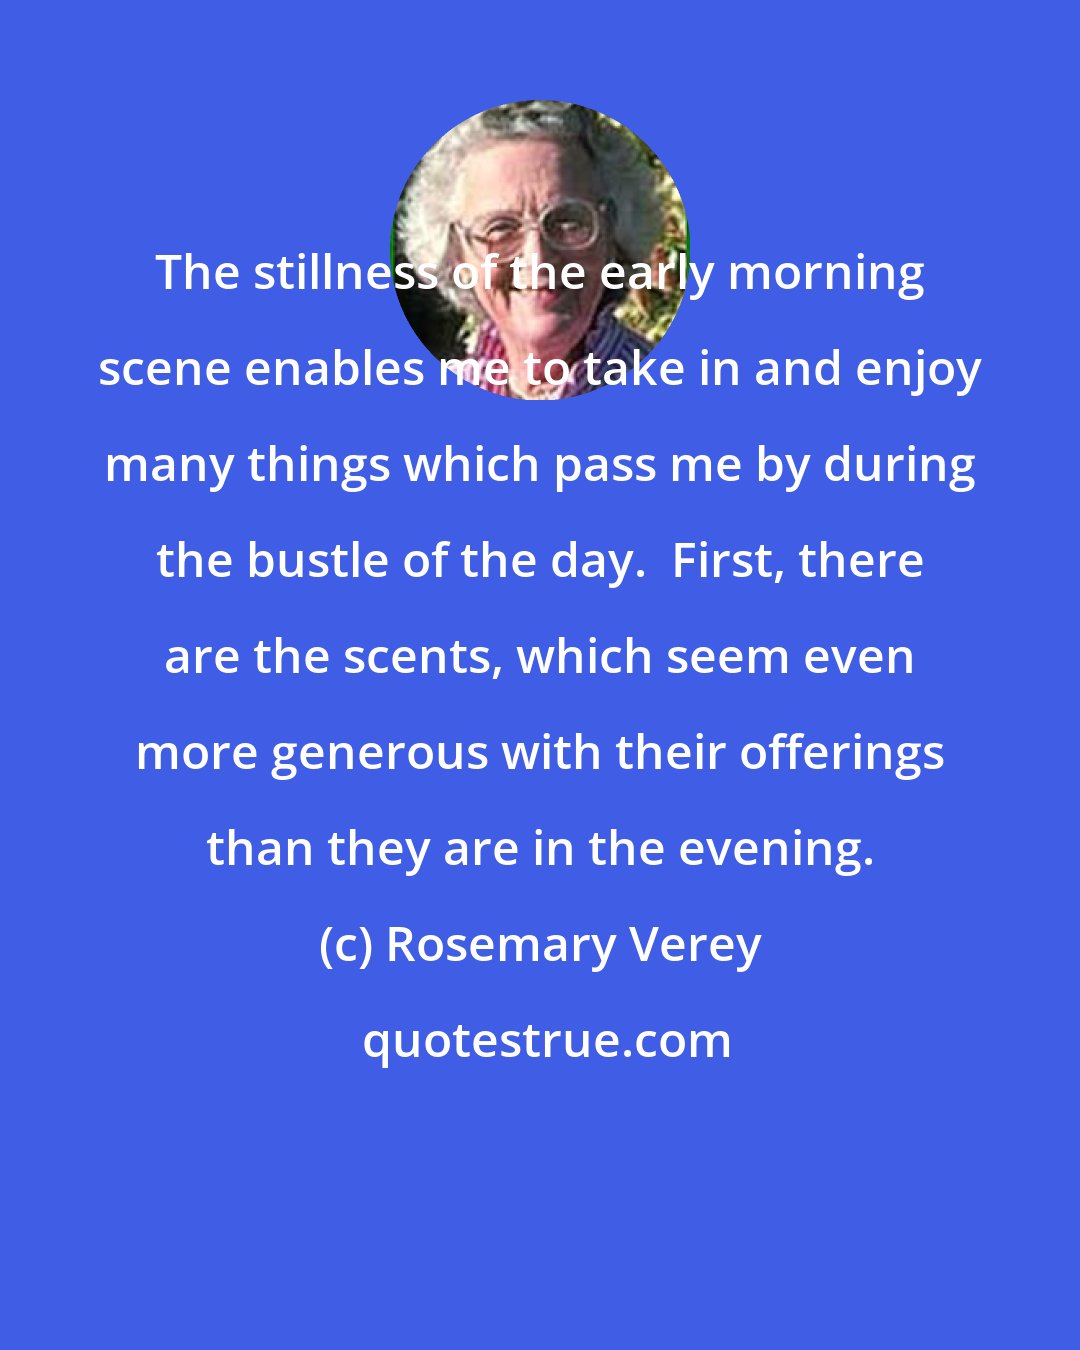 Rosemary Verey: The stillness of the early morning scene enables me to take in and enjoy many things which pass me by during the bustle of the day.  First, there are the scents, which seem even more generous with their offerings than they are in the evening.